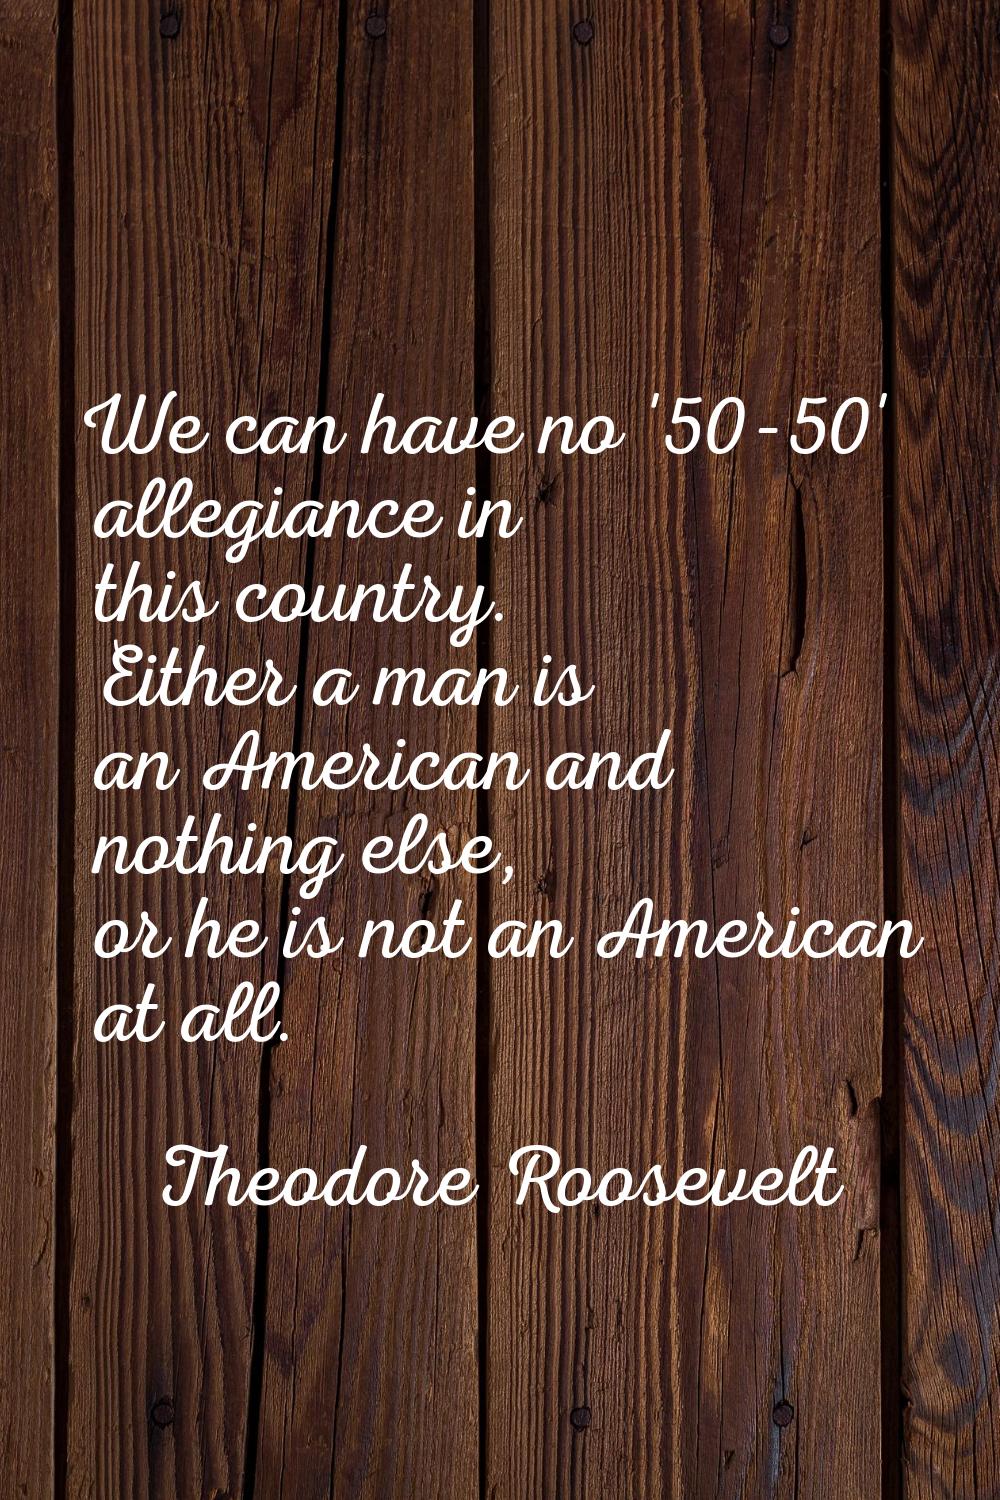 We can have no '50-50' allegiance in this country. Either a man is an American and nothing else, or